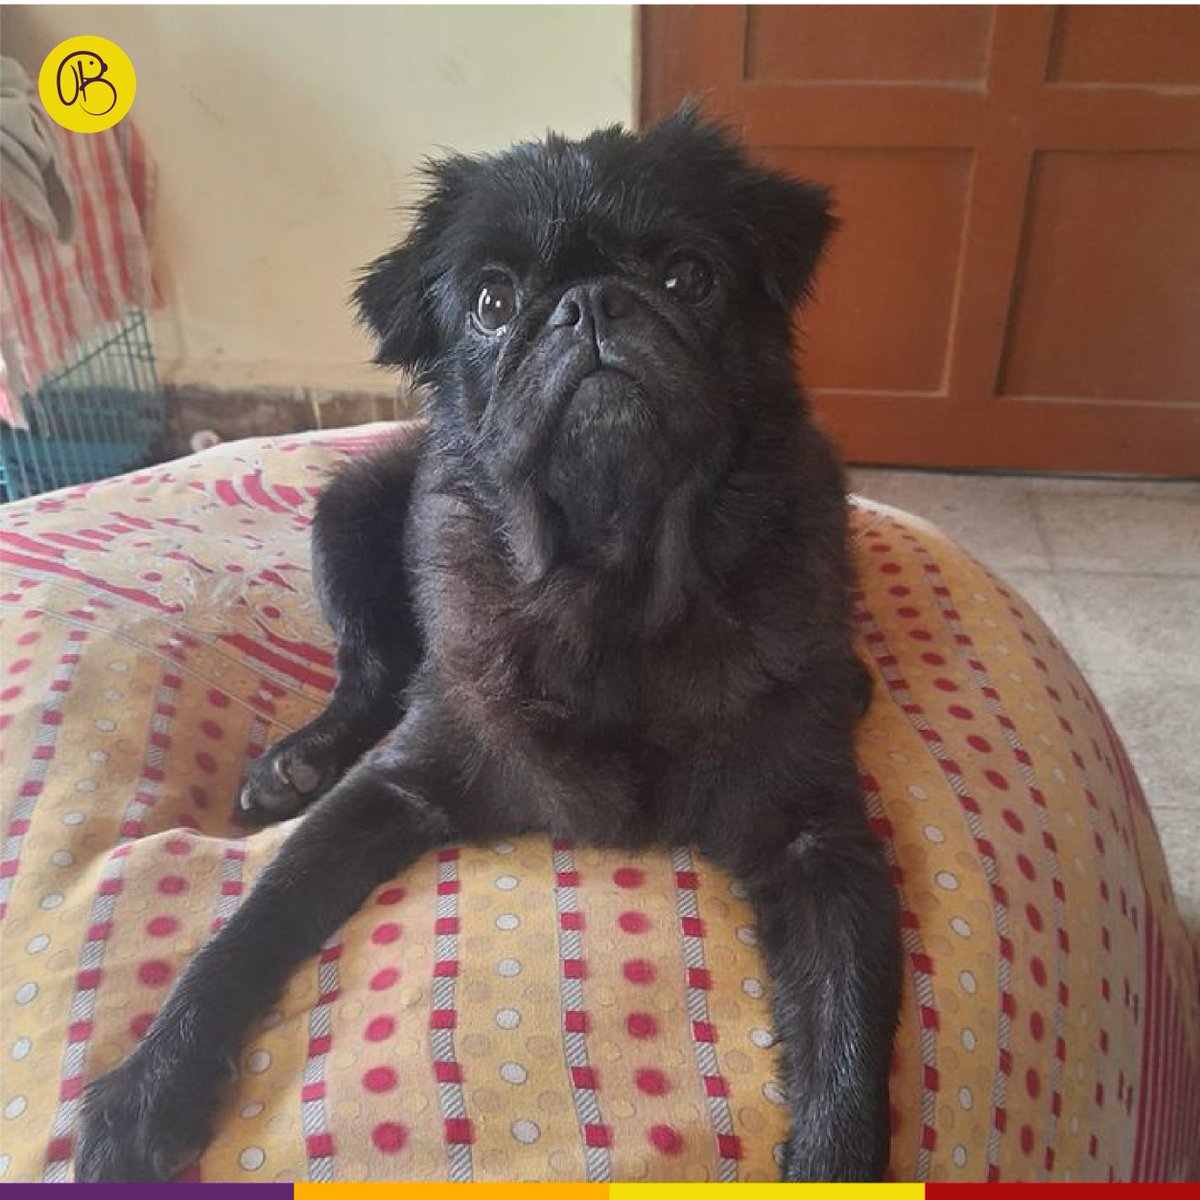 It's not Home without Furriends!
Introducing #SaturdaySuperstar Spicy to The Beasty Family!
Lots of Love!
Contact us to feature your buddy on our page.
: instagram.com/thebeastypune/
: facebook.com/thebeastypune/
: linkedin.com/company/the-be…

#Blackdog #blackdoglove #blackdogday #dogoftheday